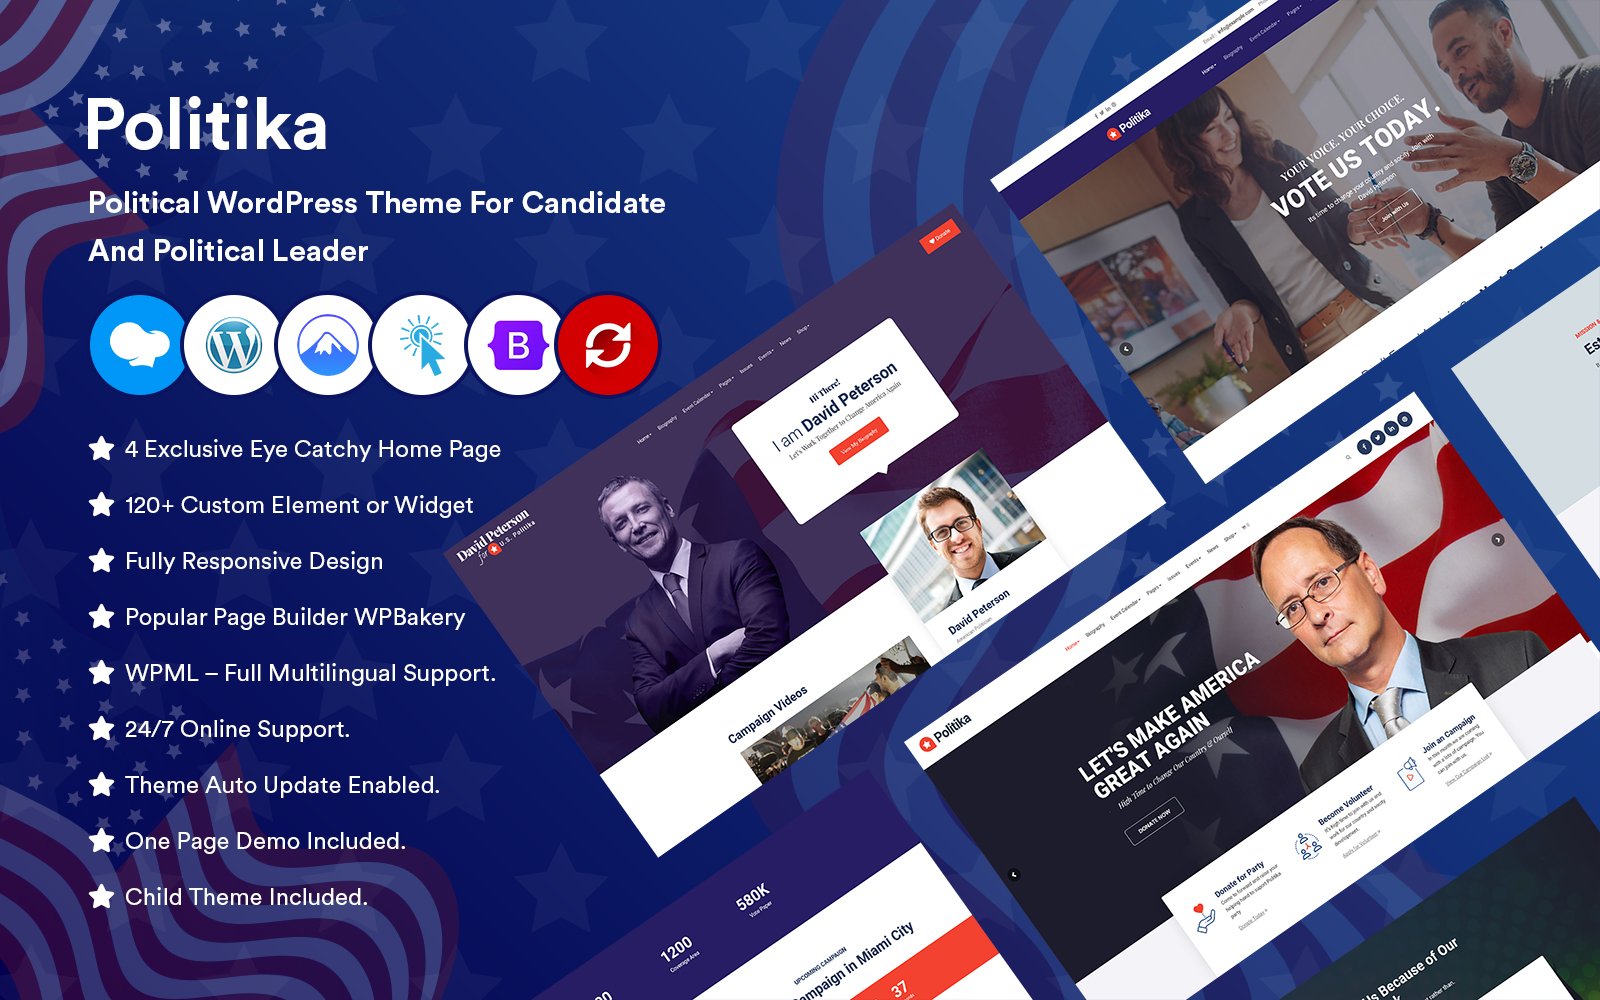 Politika - Political WordPress Theme For Candidate and political leader